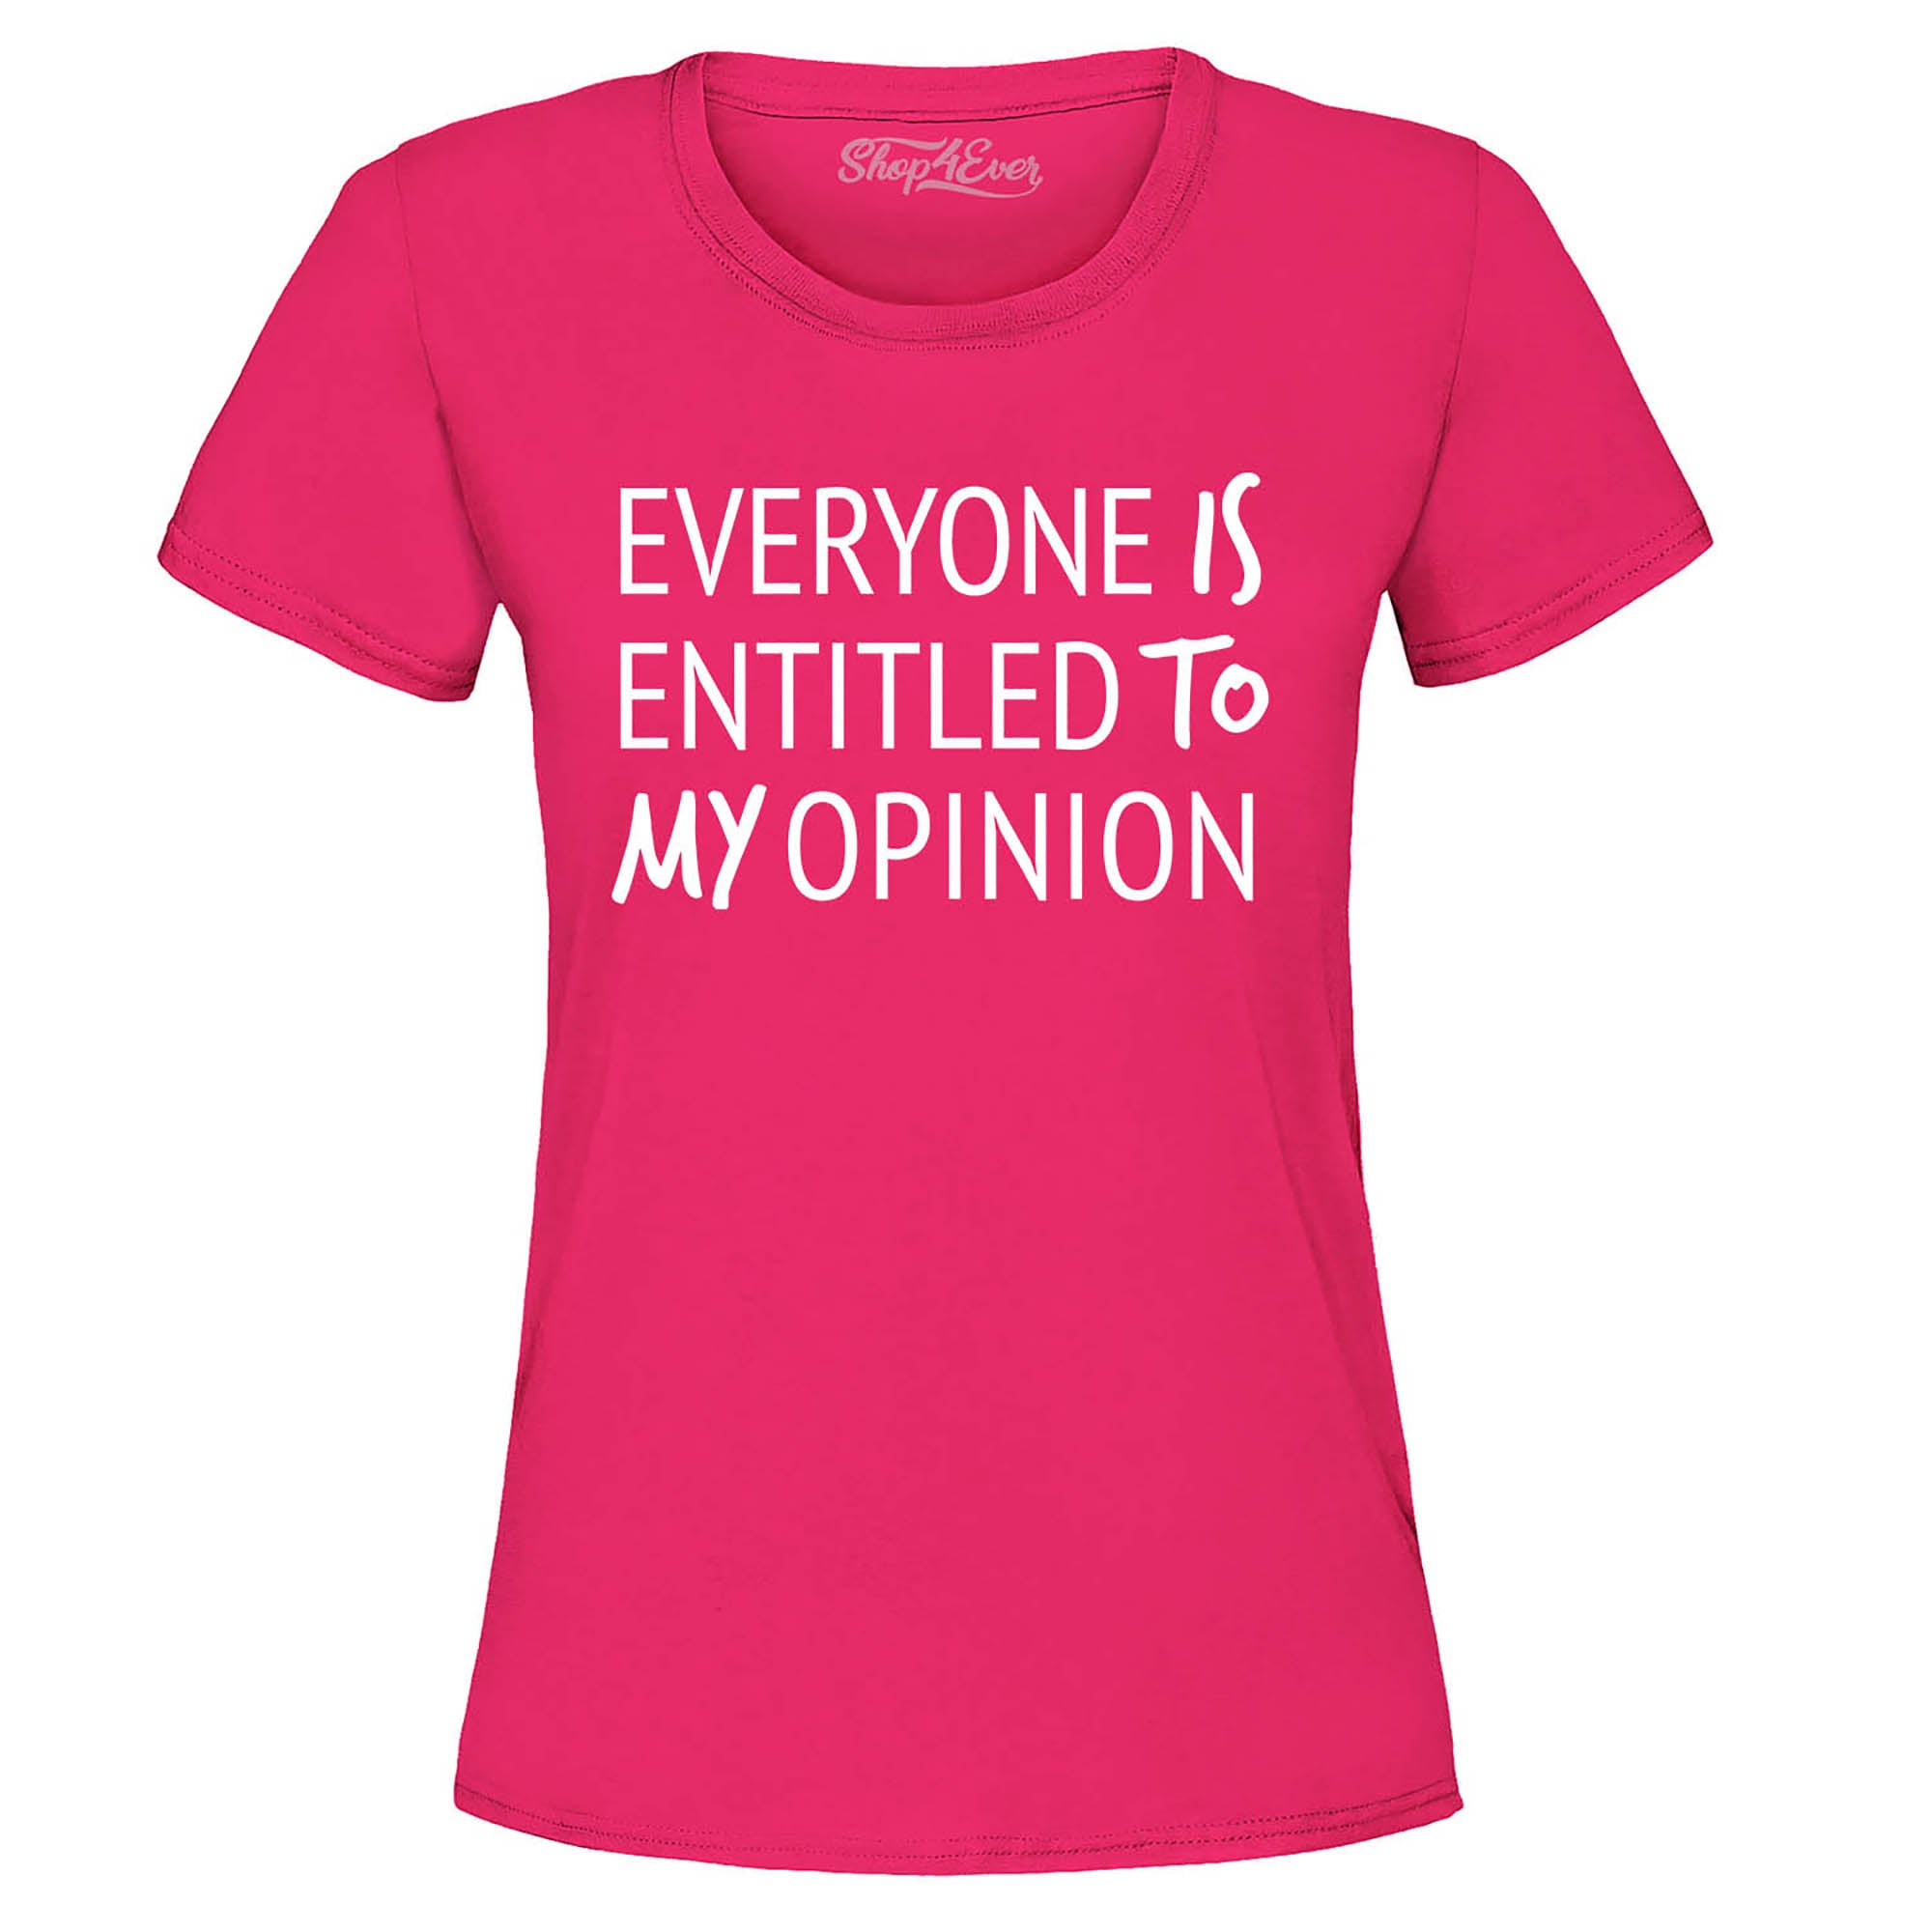 Everyone is Entitled to My Opinion Funny Sarcastic Women's T-Shirt